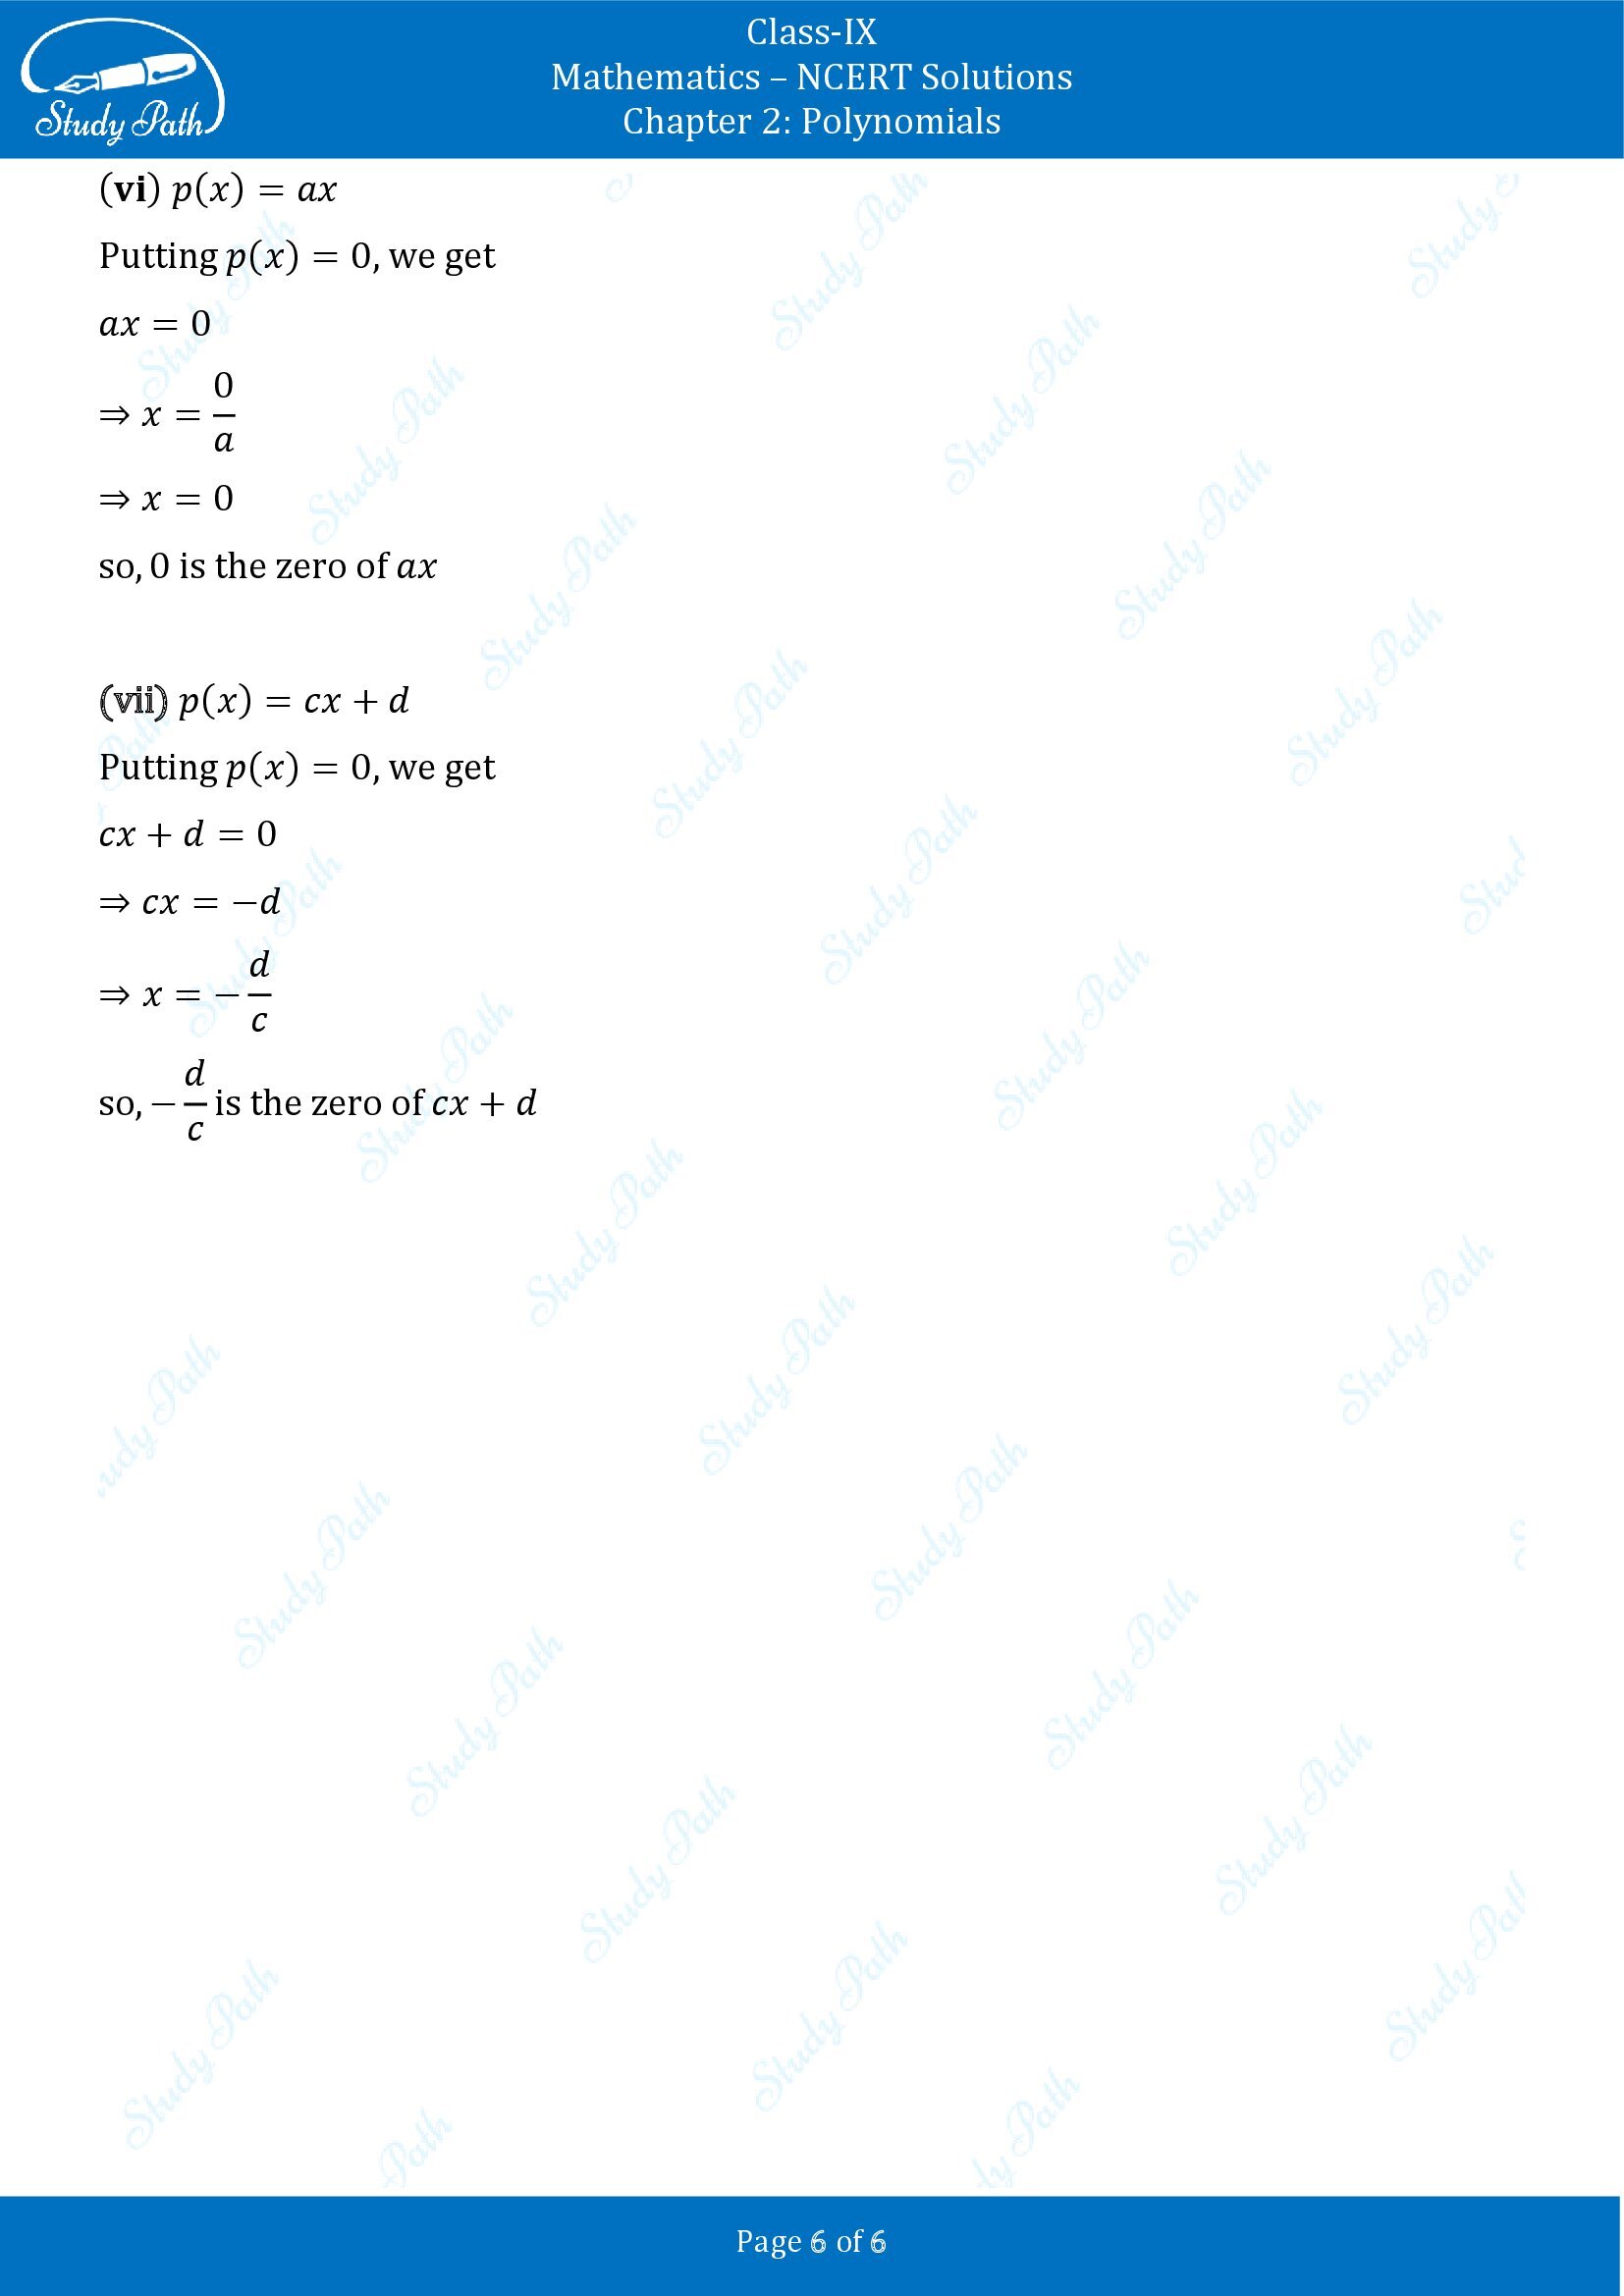 NCERT Solutions for Class 9 Maths Chapter 2 Polynomials Exercise 2.2 00006